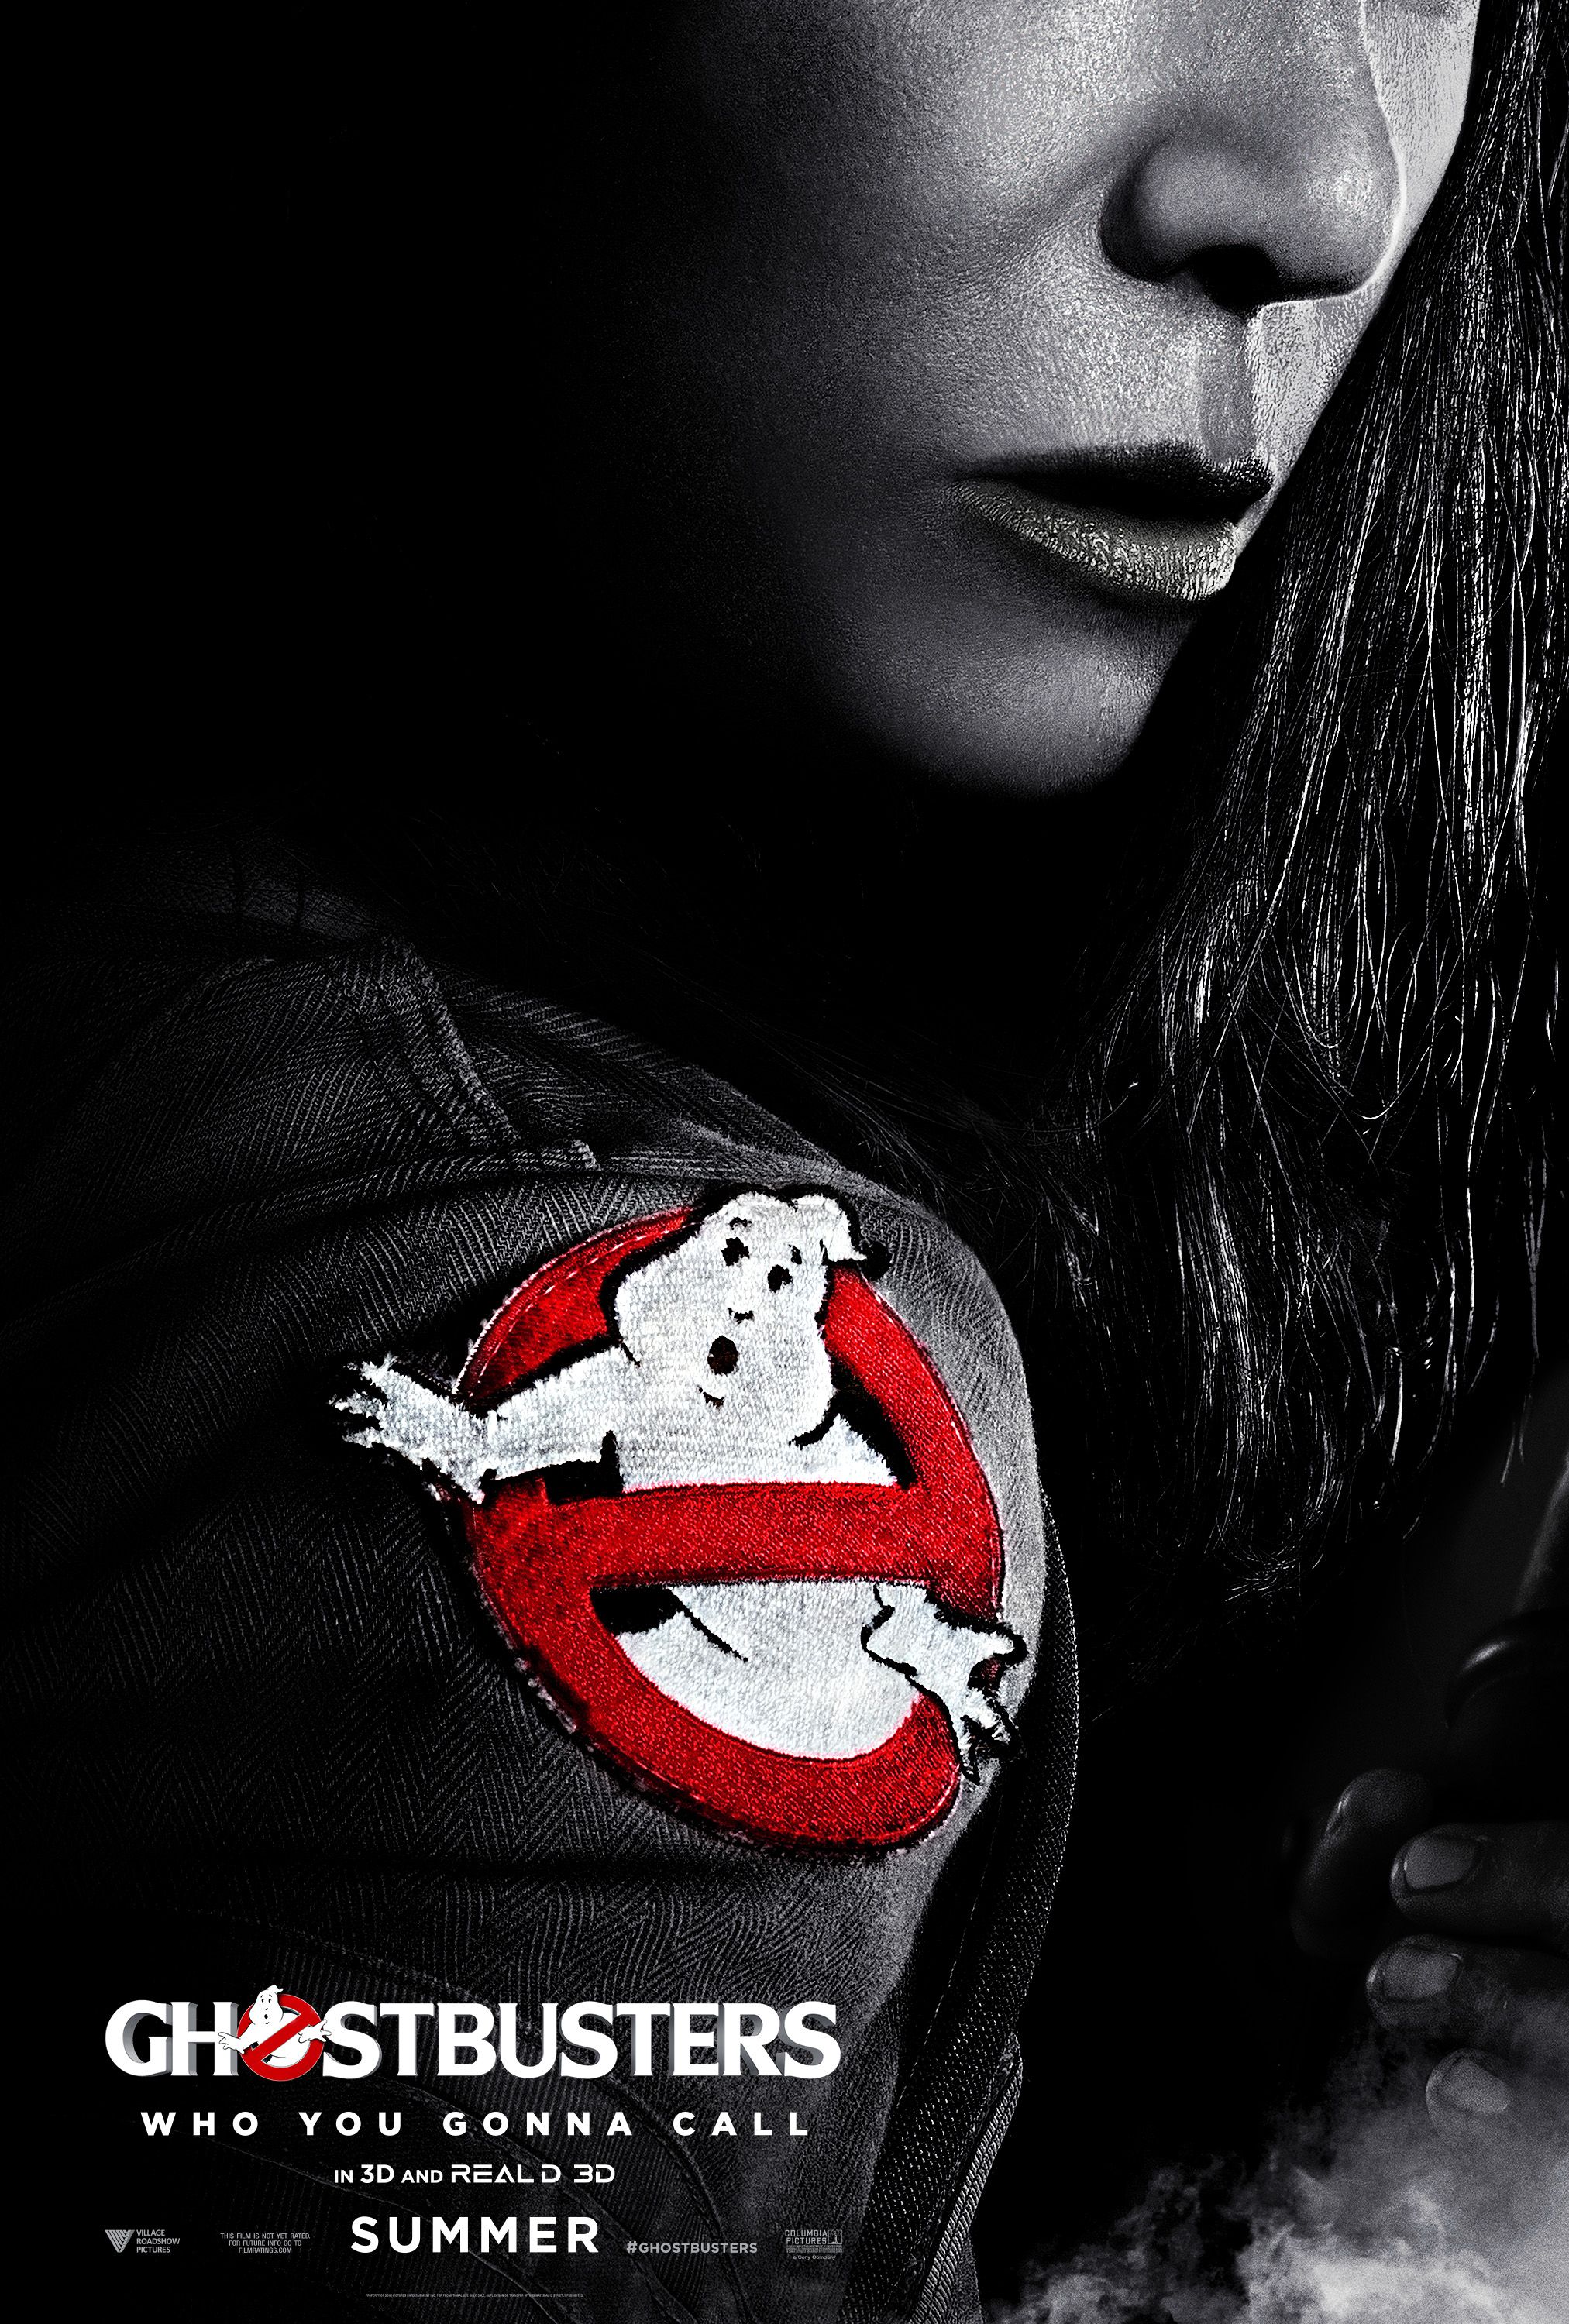 Ghostbusters Reboot Posters Feature Melissa McCarthy, More Collider